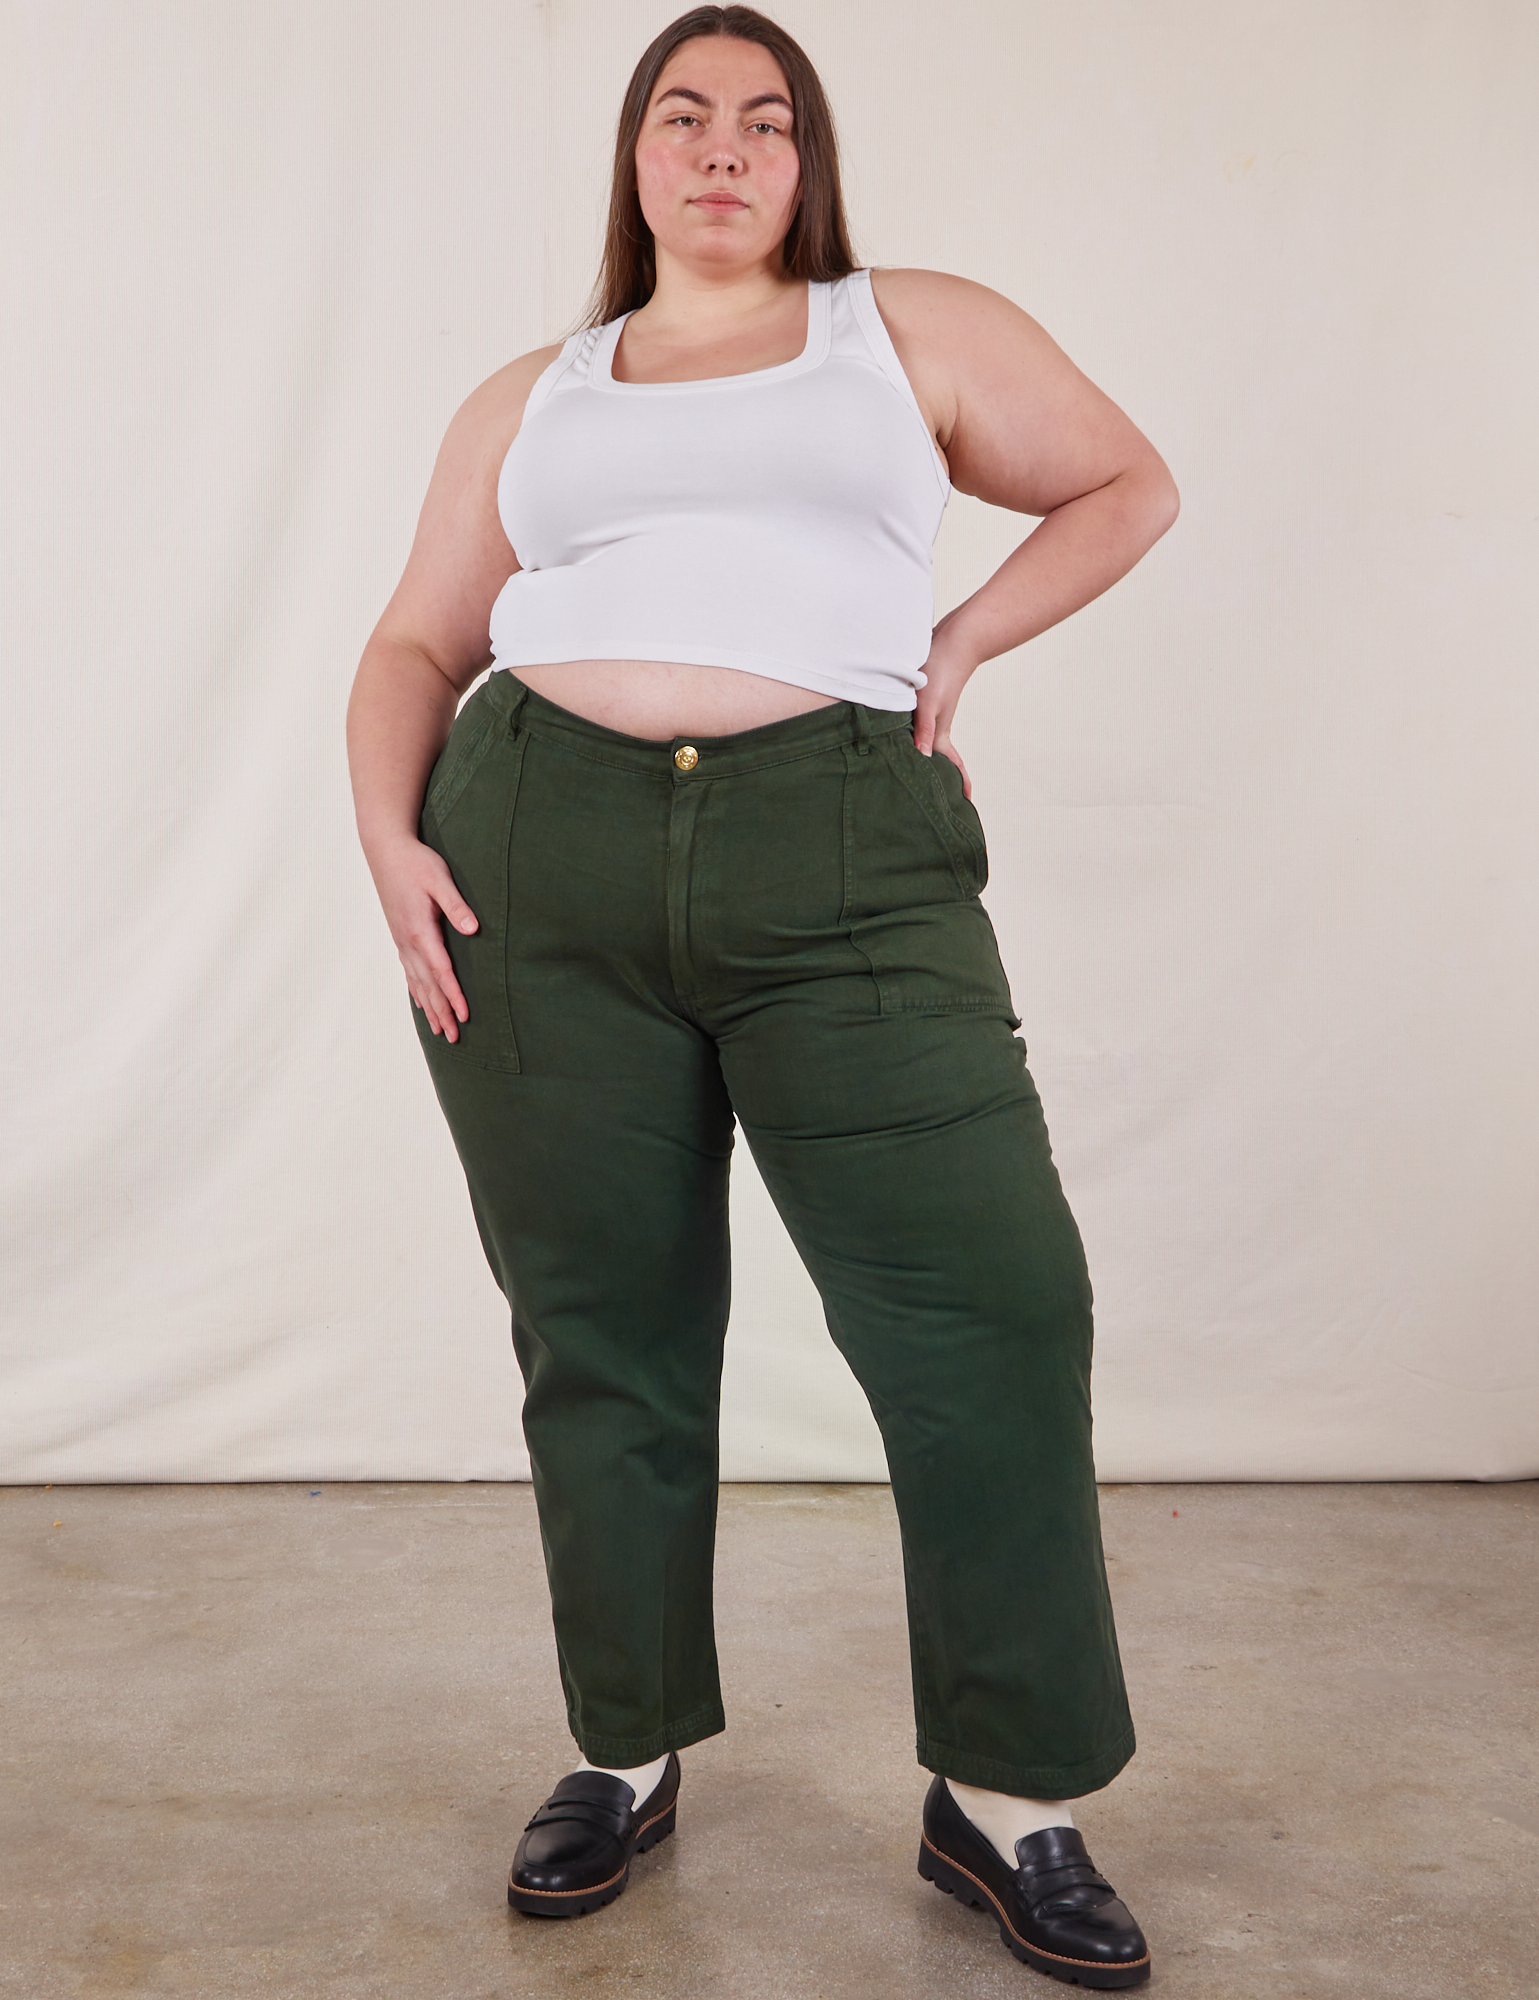 Marielena is 5&#39;8&quot; and wearing 2XL Work Pants in Swamp Green paired with vintage tee off-white Cropped Tank